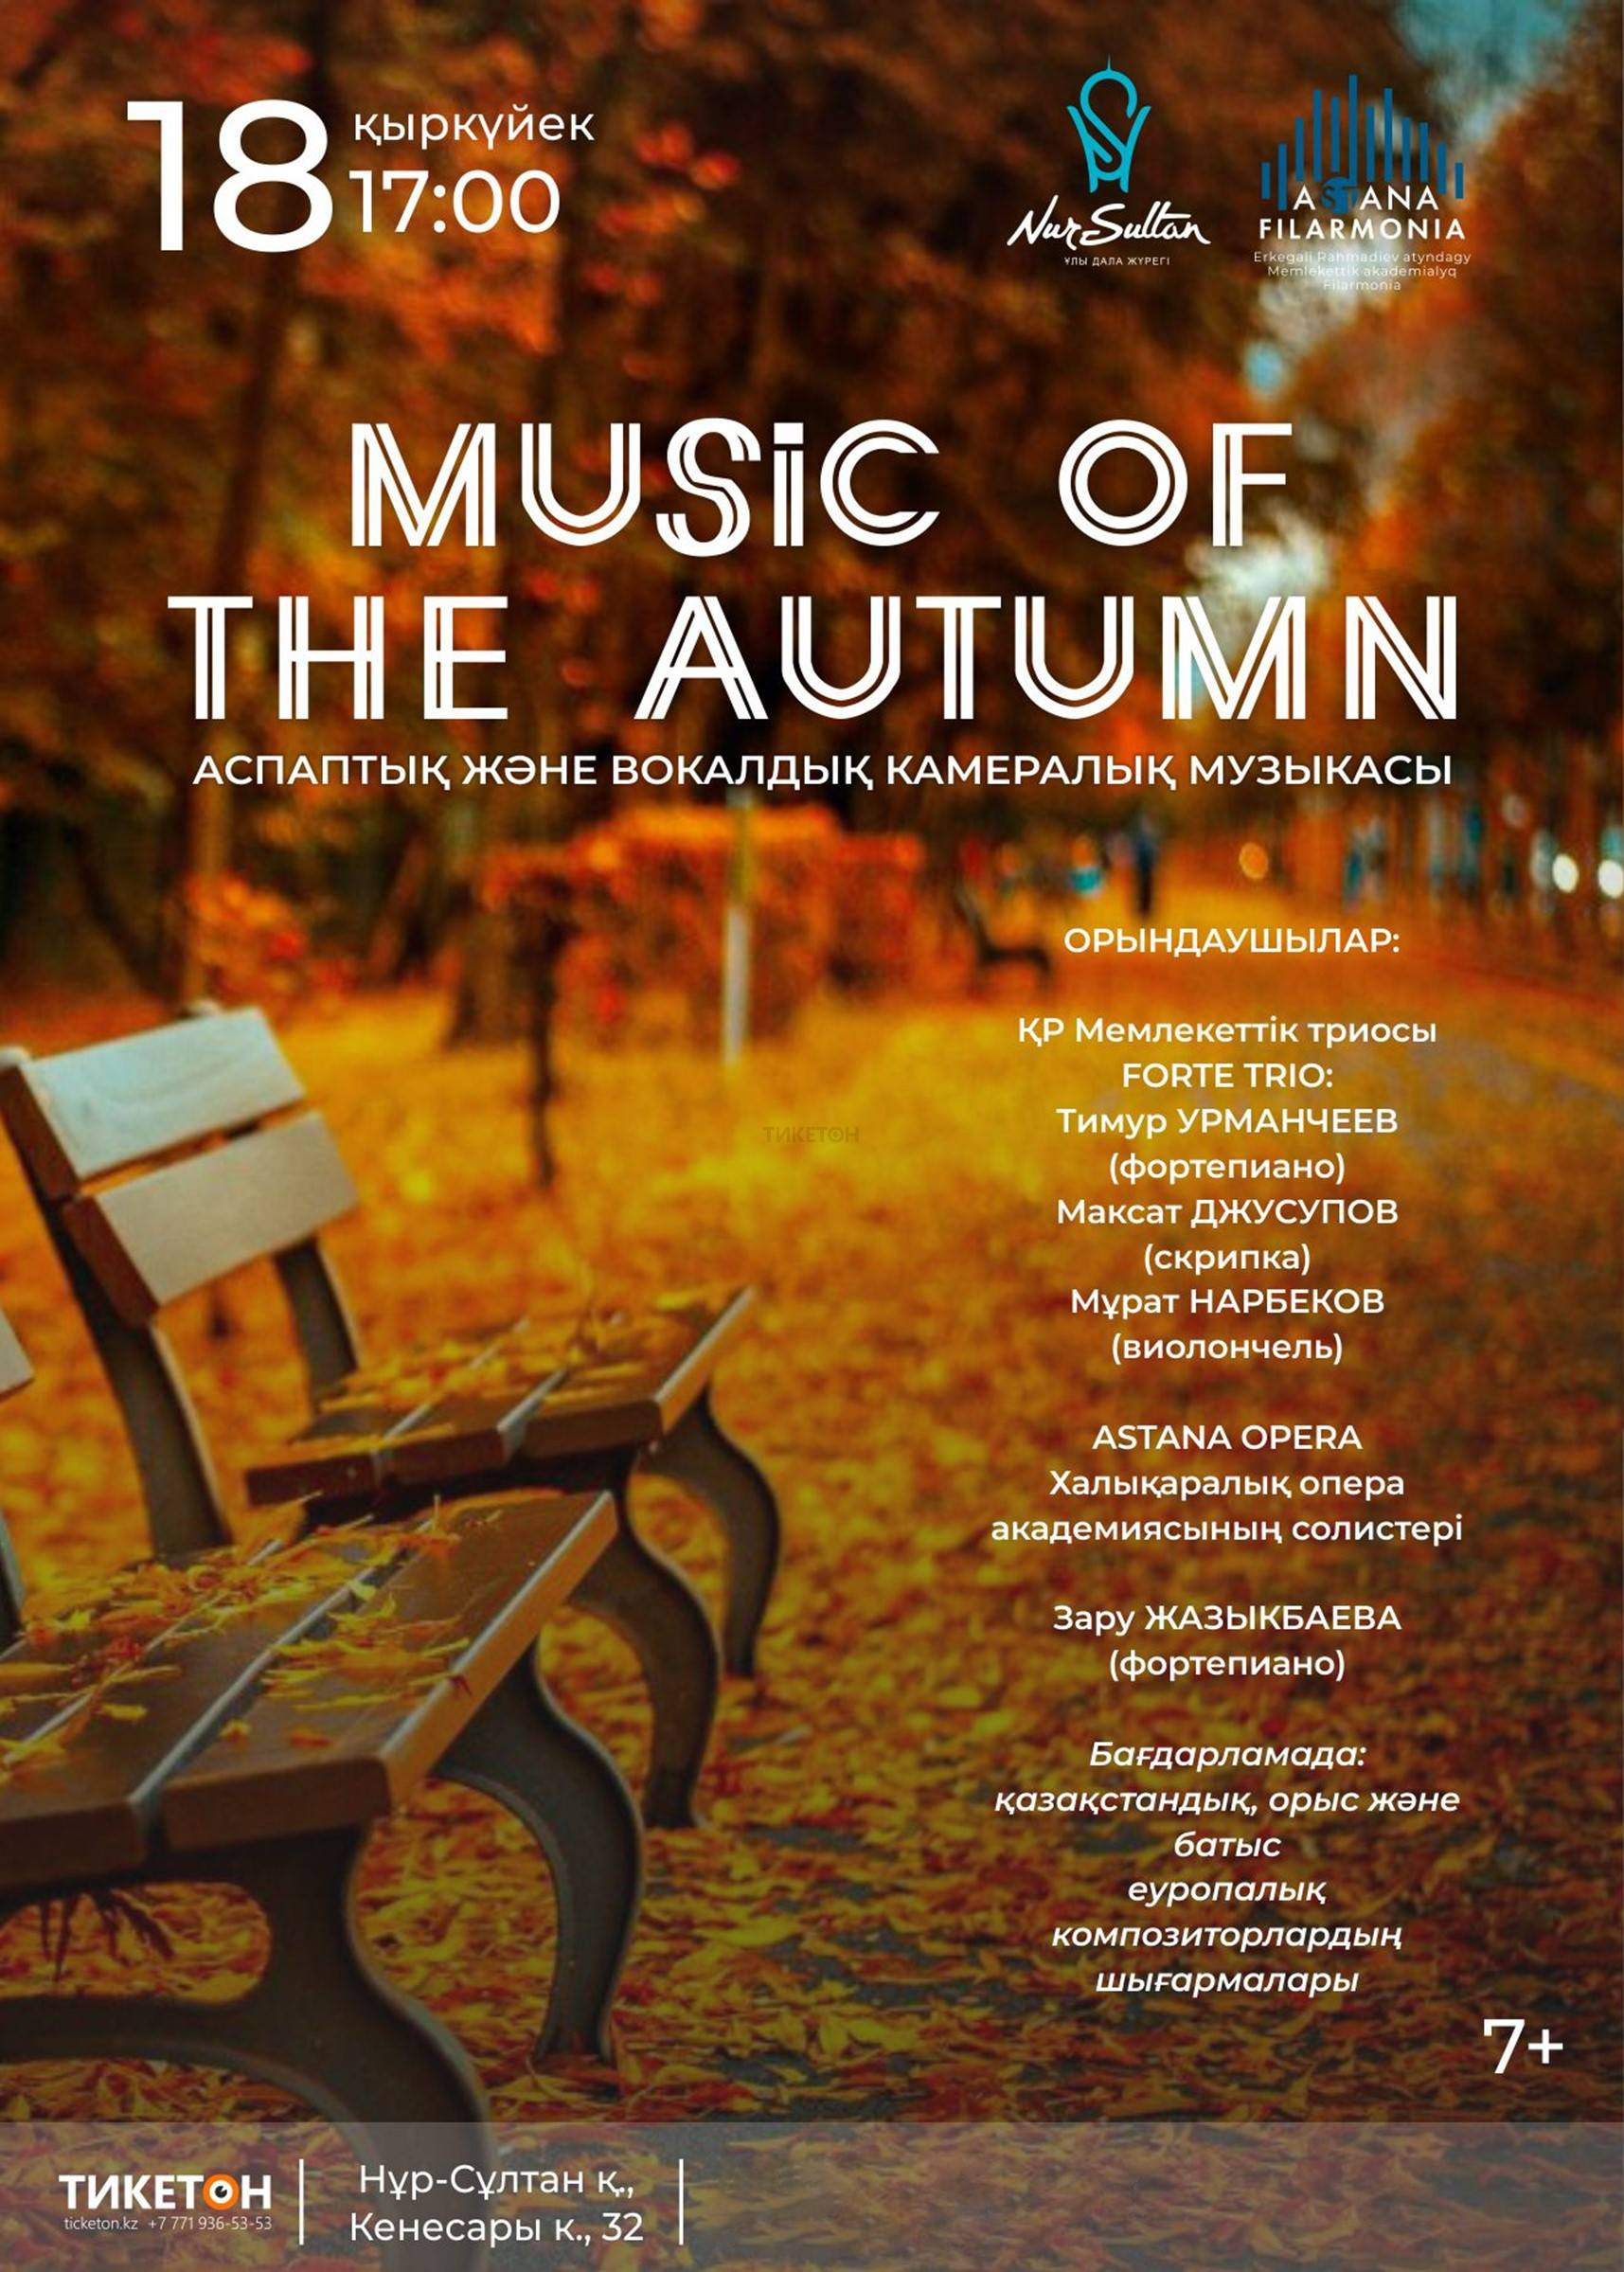 Music of the autumn